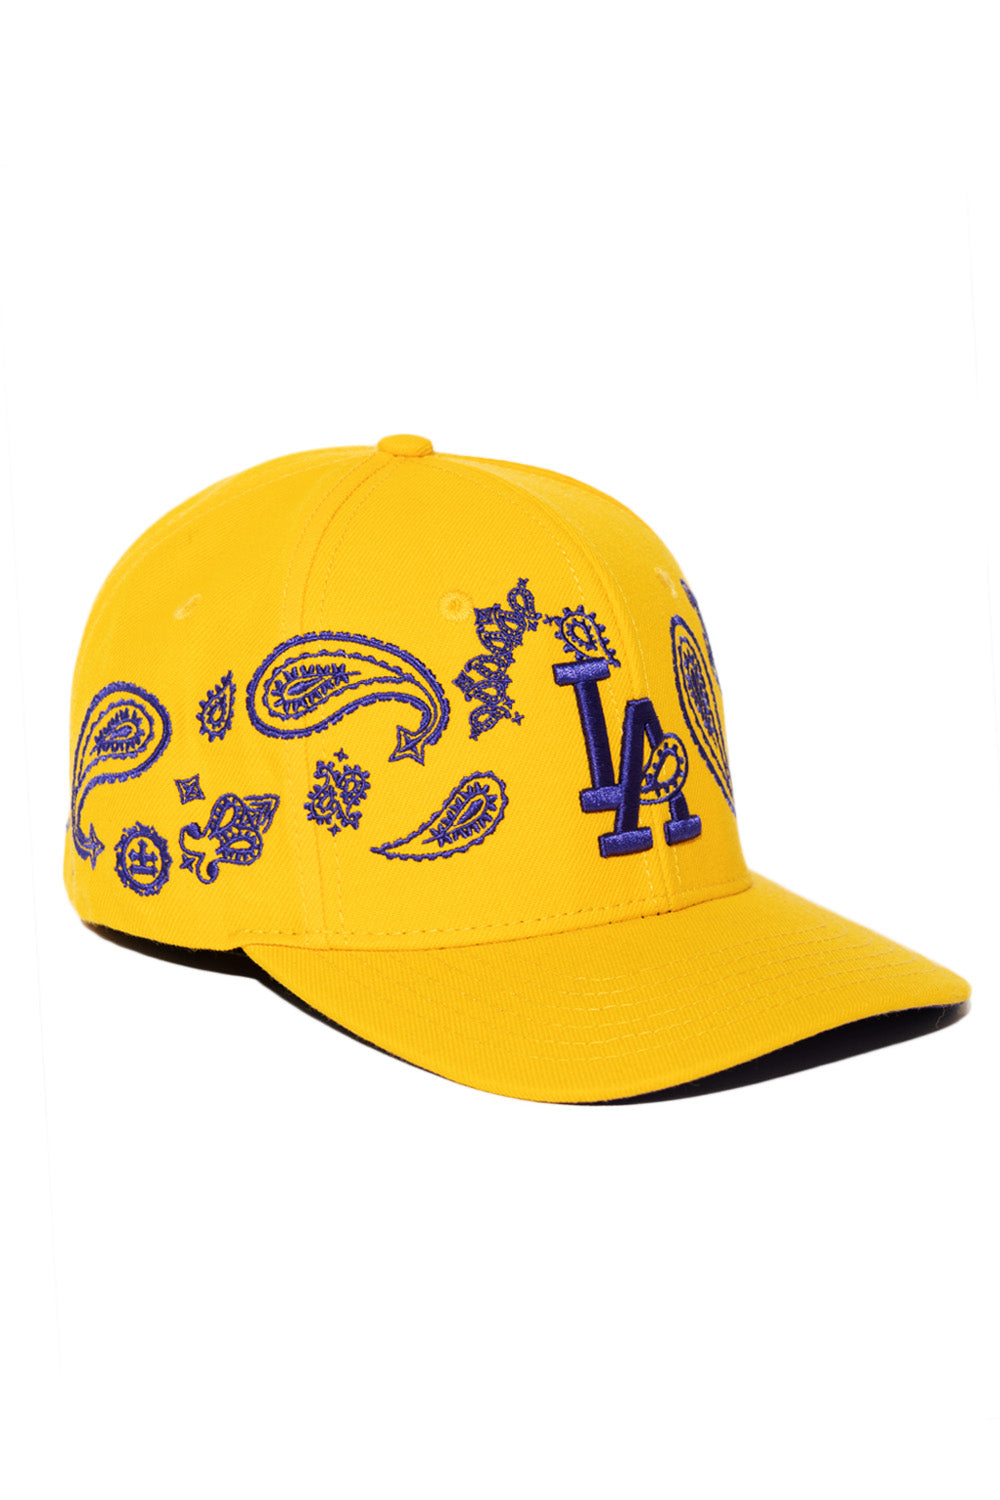 PAISLEY CITY TOUR FITTED (YELLOW LOS ANGELES)